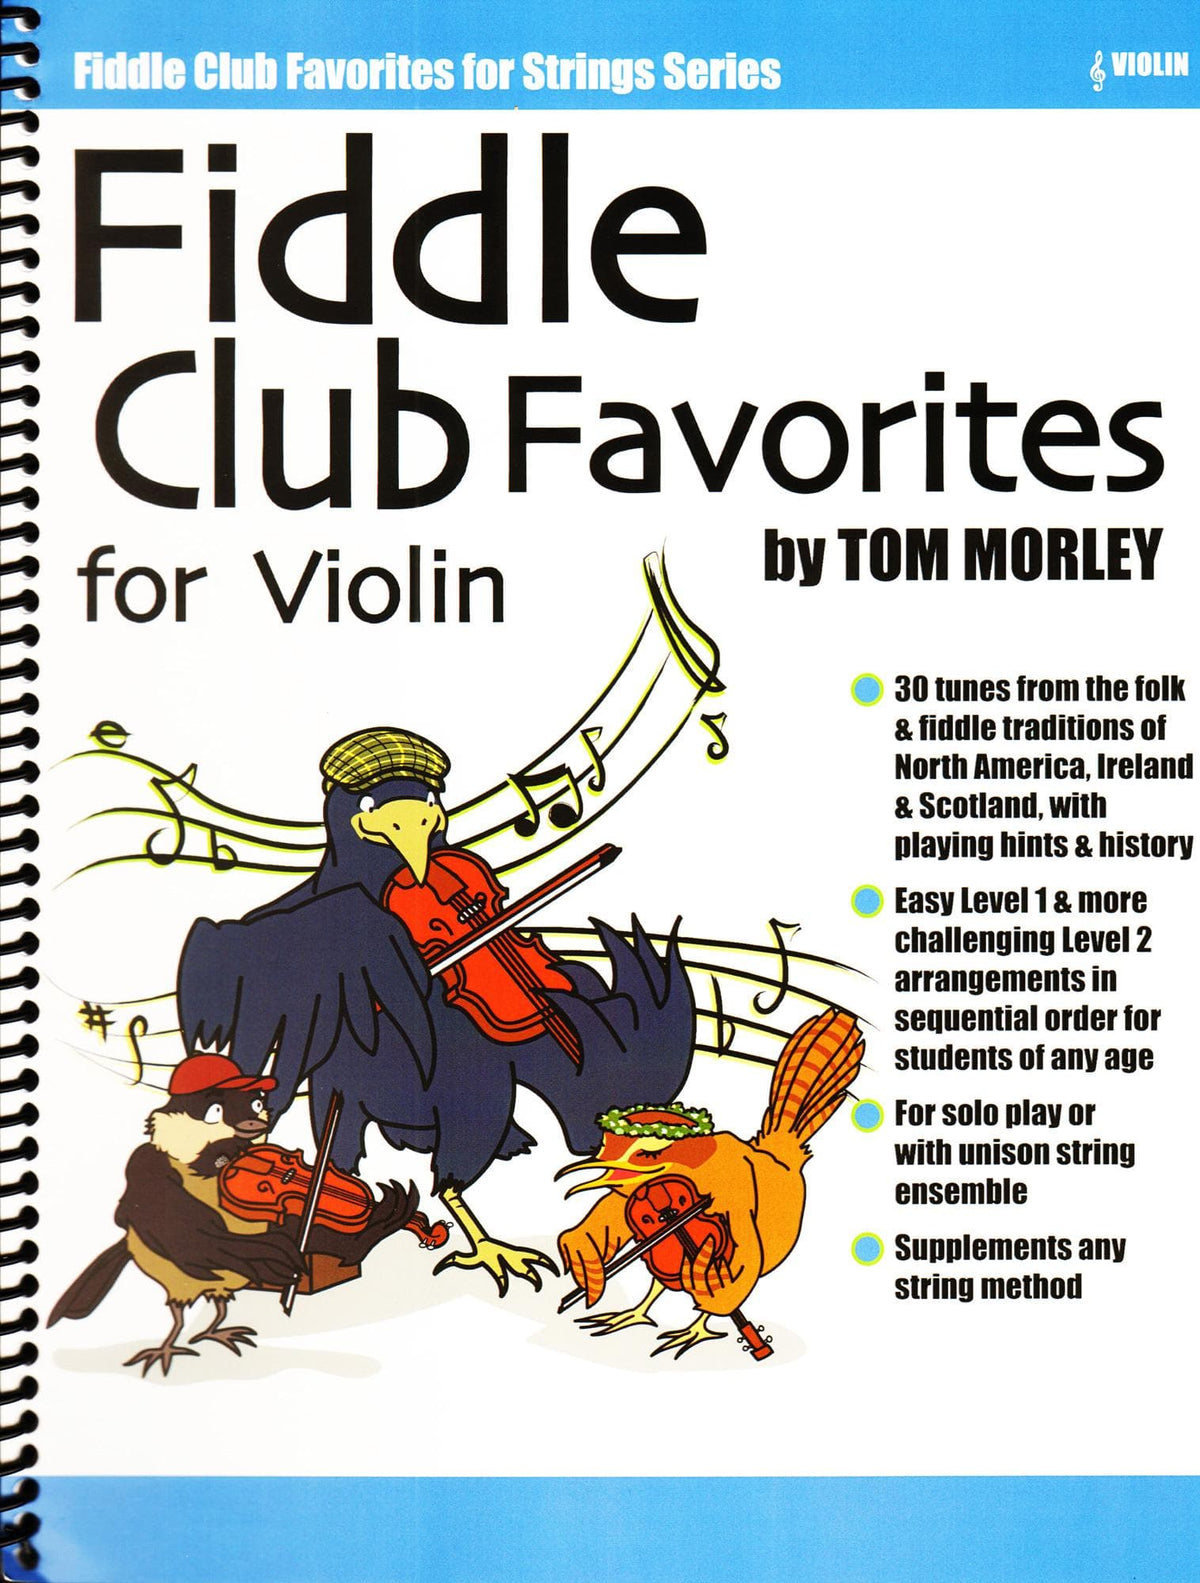 Tom Morley - Fiddle Club Favorities - for Violin - by Flying Frog Music